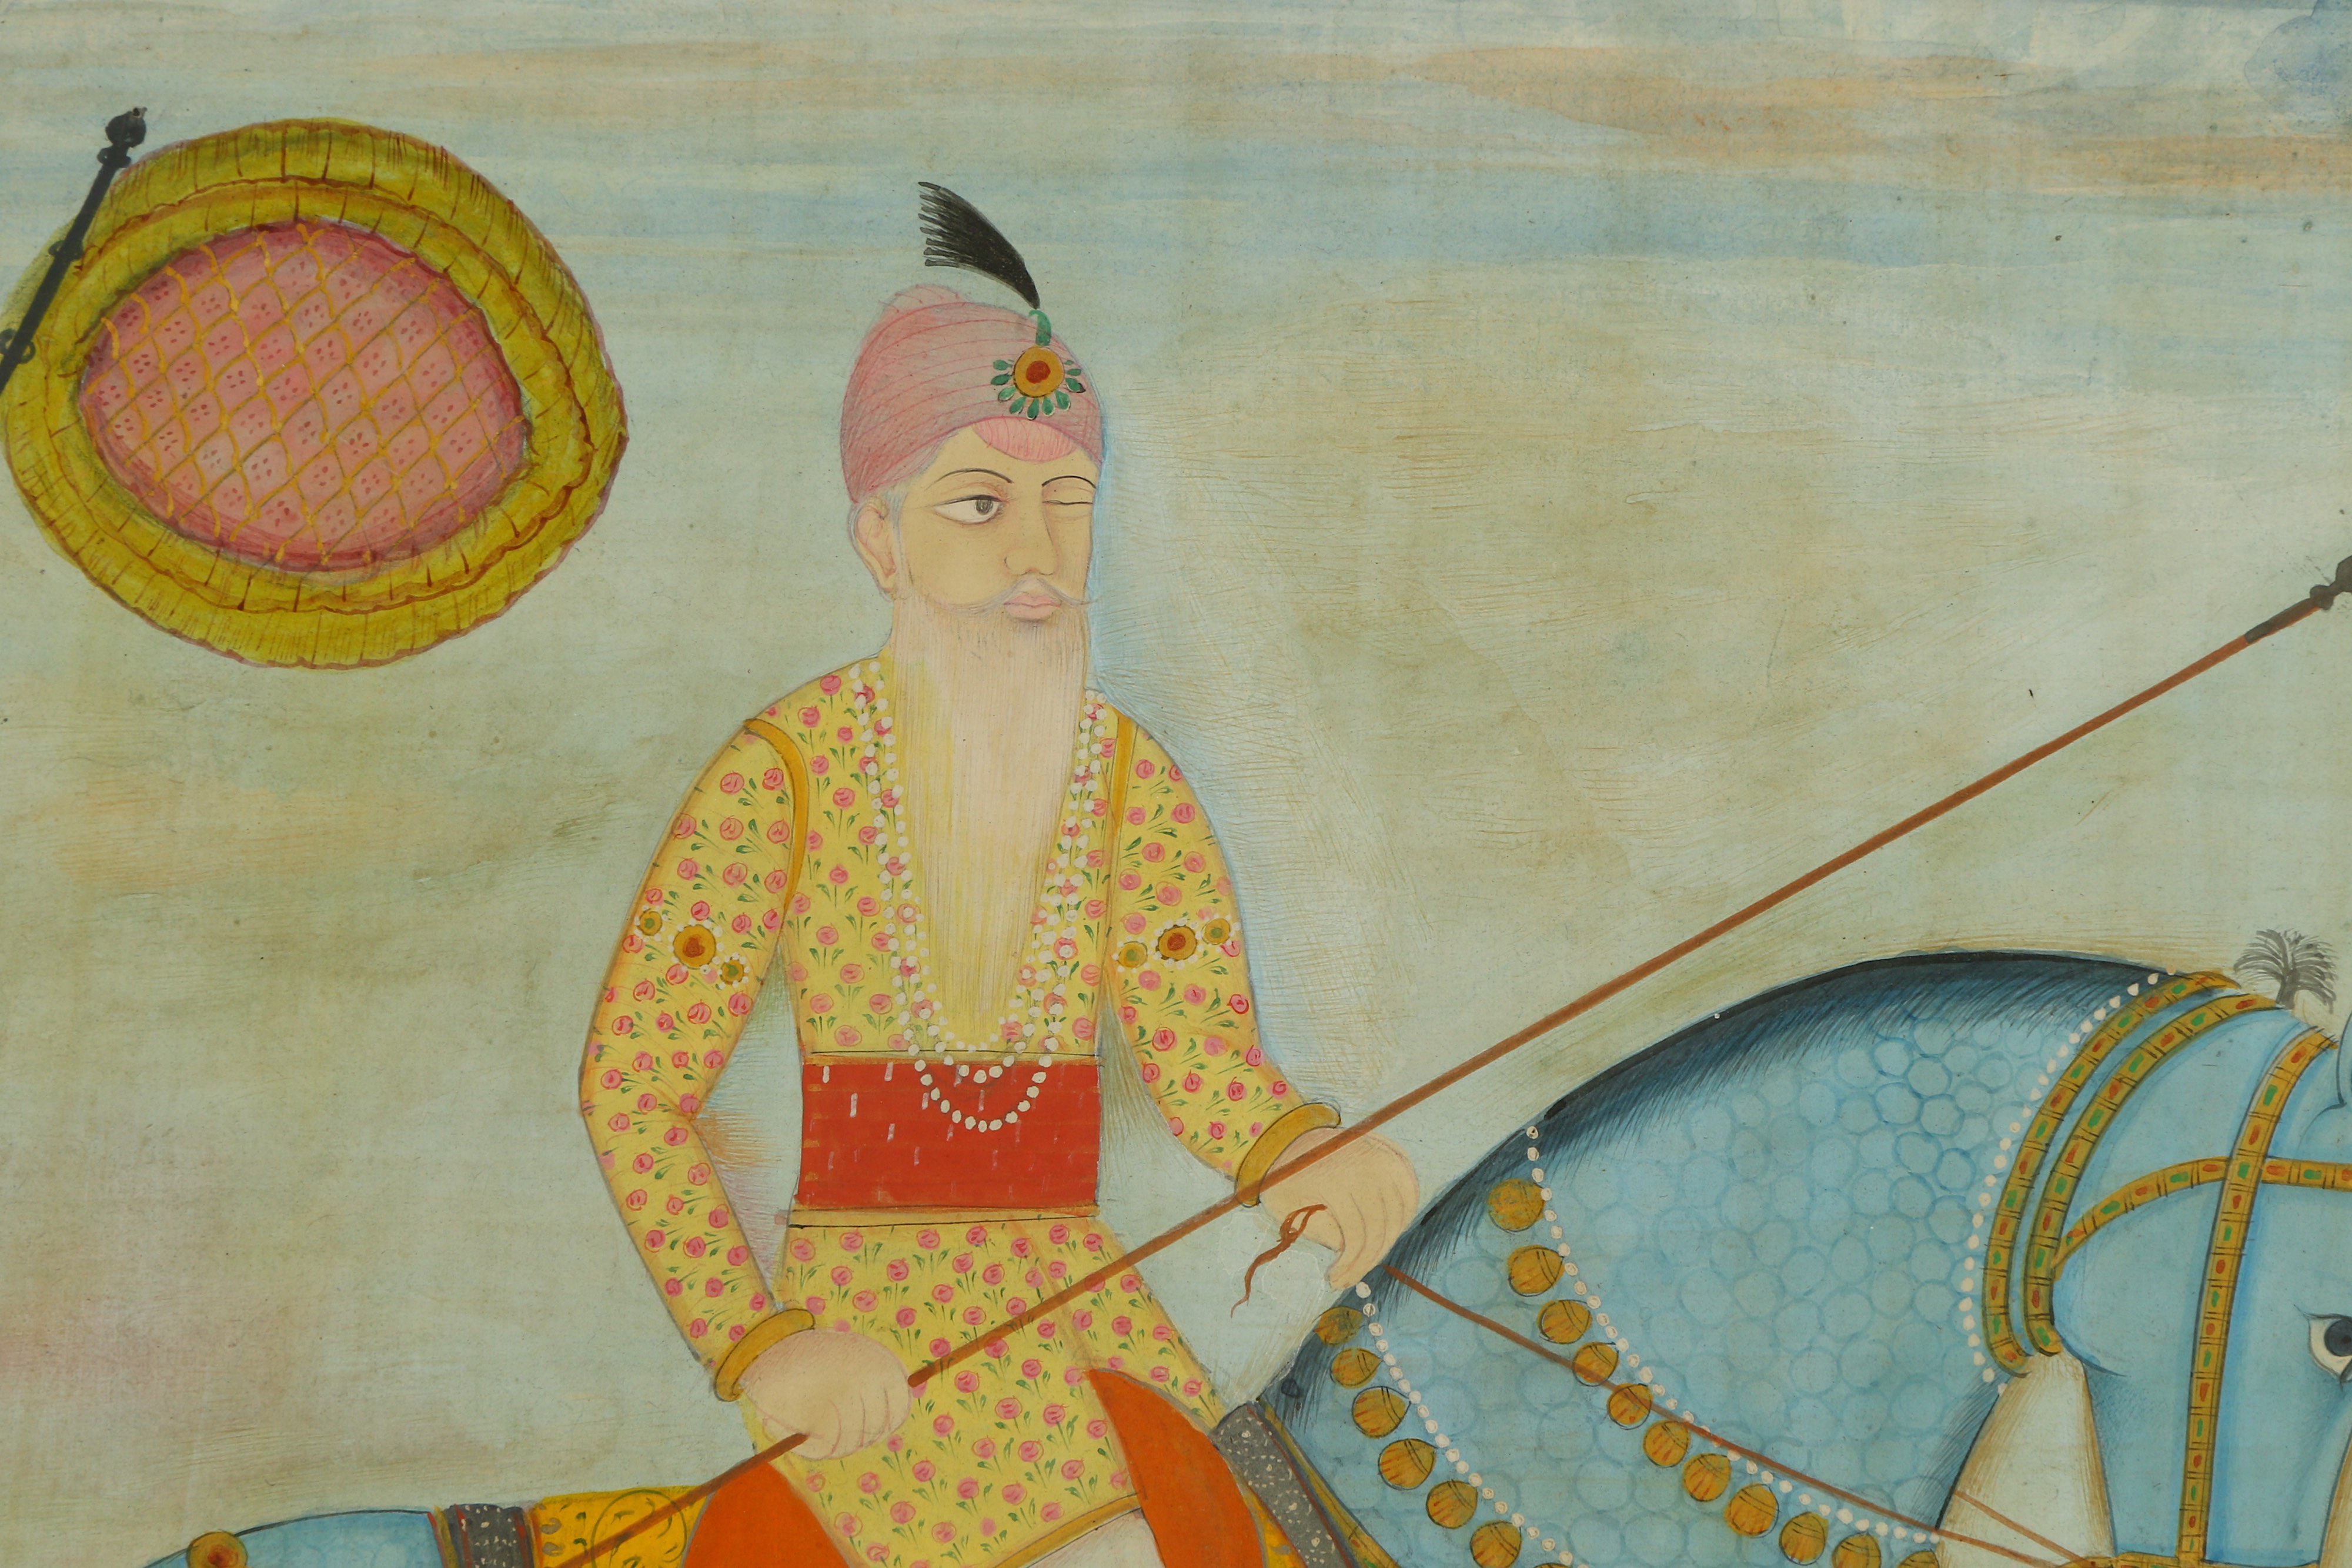 A LARGE EQUESTRIAN PORTRAIT OF RANJIT SINGH - Image 4 of 4